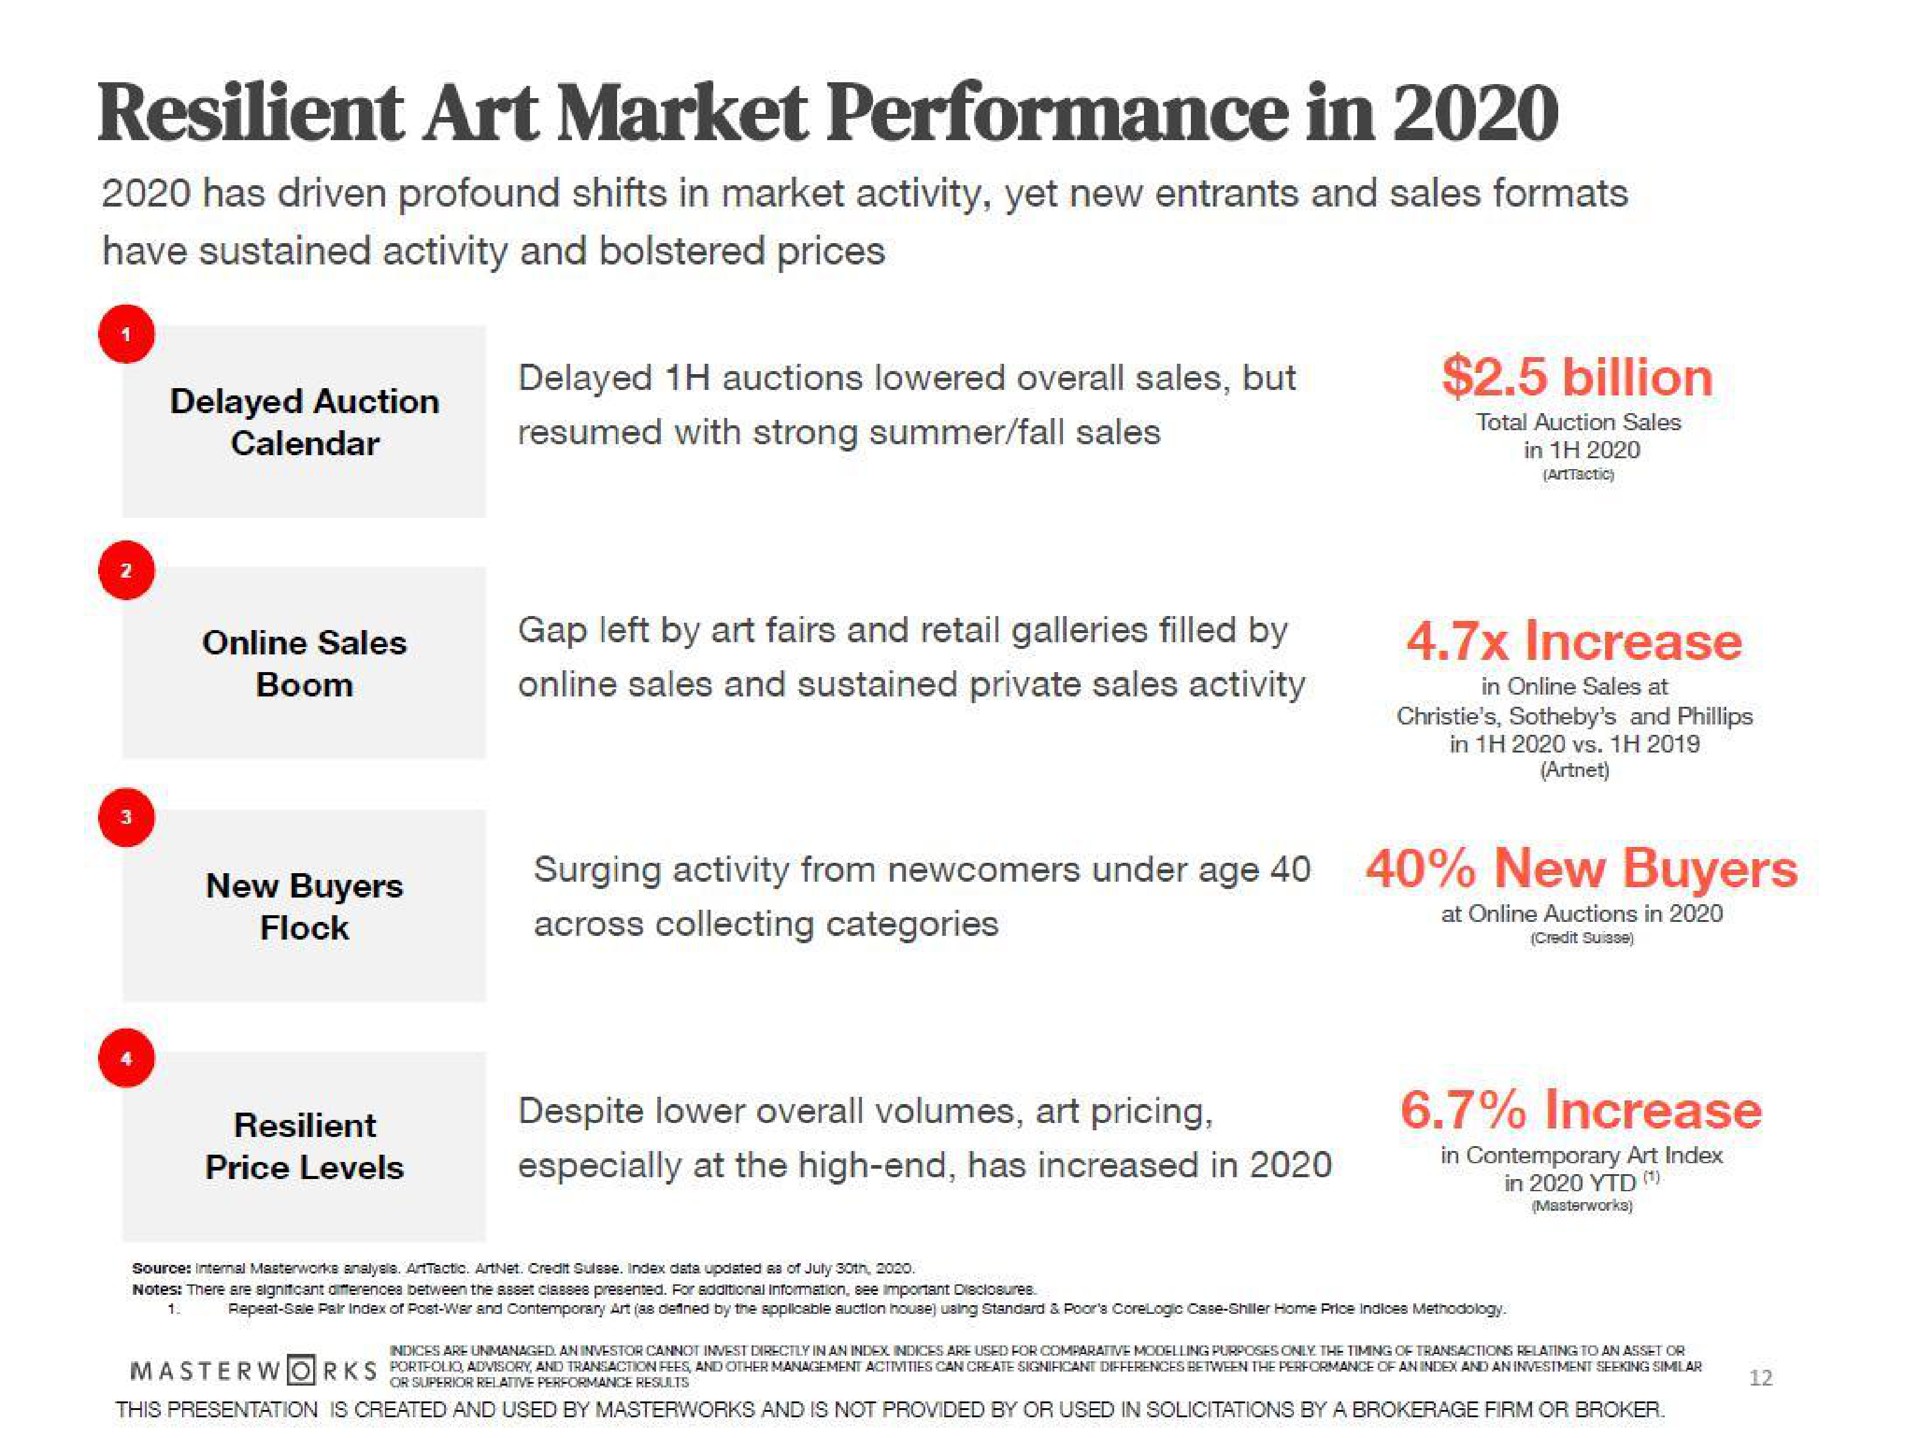 resilient art market performance in has driven profound shifts in market activity yet new entrants and sales formats have sustained activity and bolstered prices delayed auctions lowered overall sales but resumed with strong summer fall sales ies billion new buyers surging activity from newcomers under age new buyers ices price levels despite lower overall volumes art pricing especially at the high end has increased in increase | Masterworks